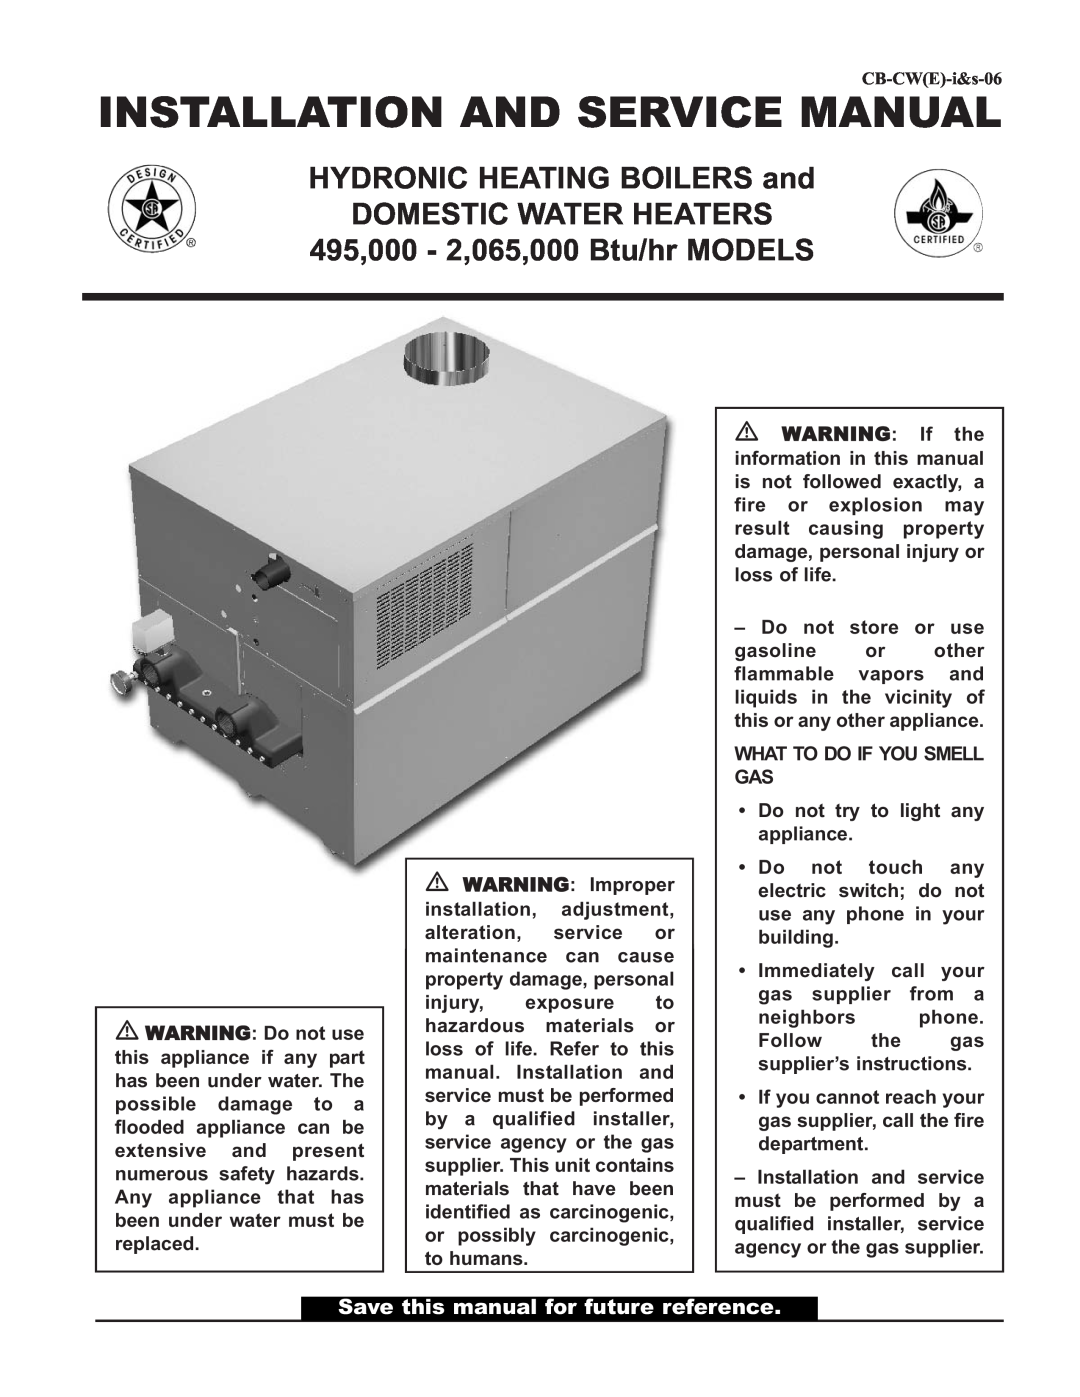 Lochinvar service manual HYDRONIC HEATING BOILERS and, Domestic Water Heaters, 495,000 - 2,065,000 Btu/hr MODELS 